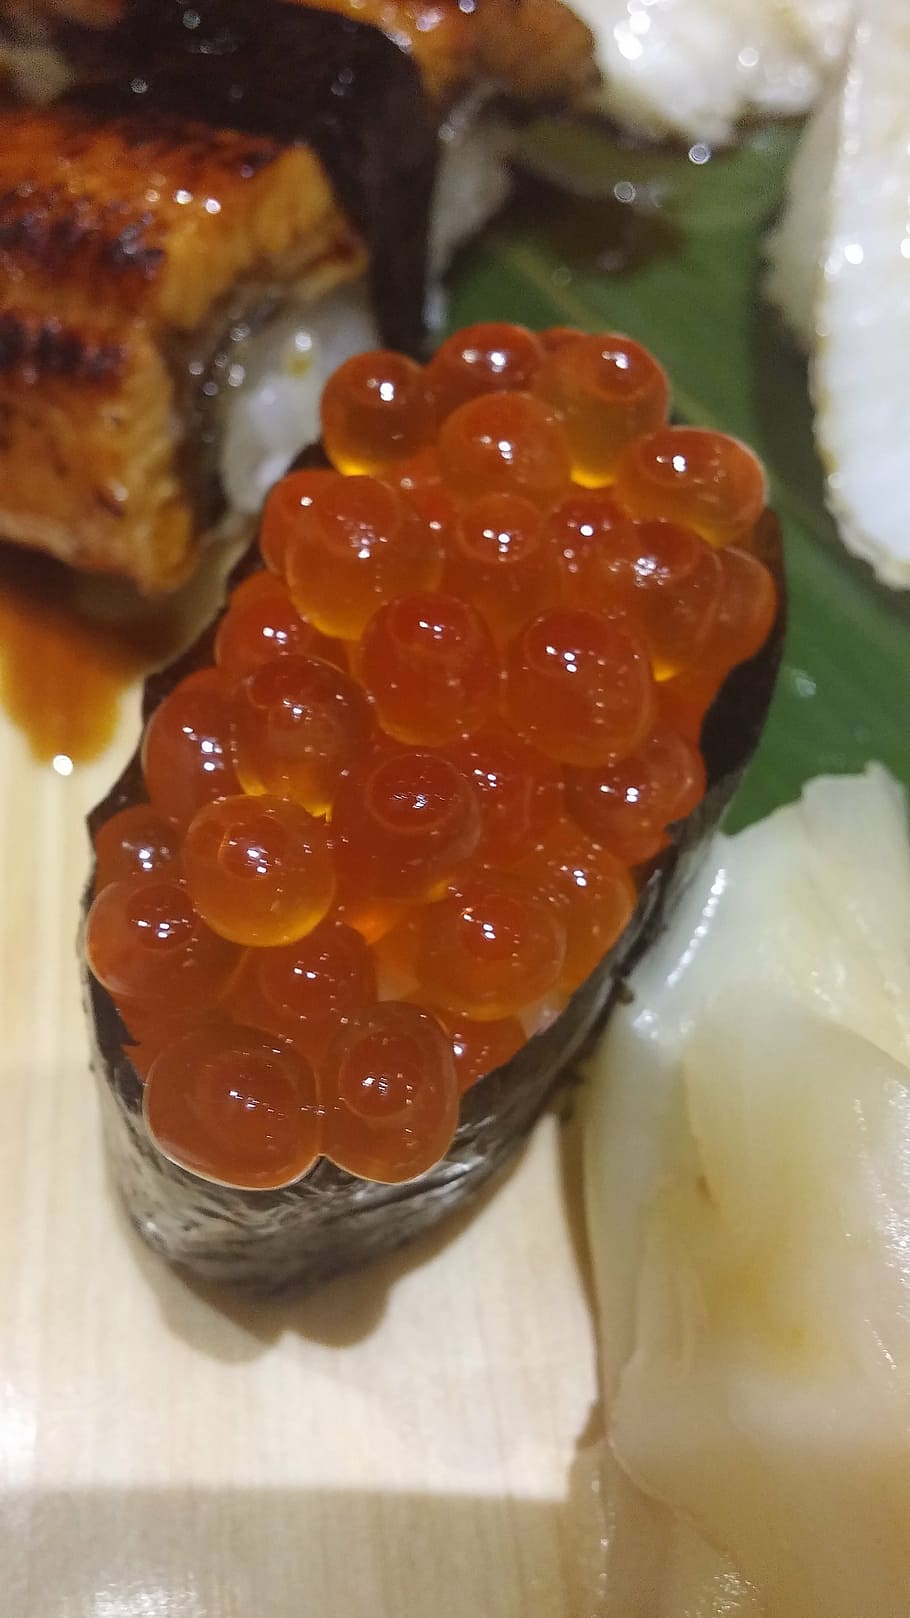 japanese food, sushi, food, restaurant, dish, eat, healthy, food and drink, freshness, close-up